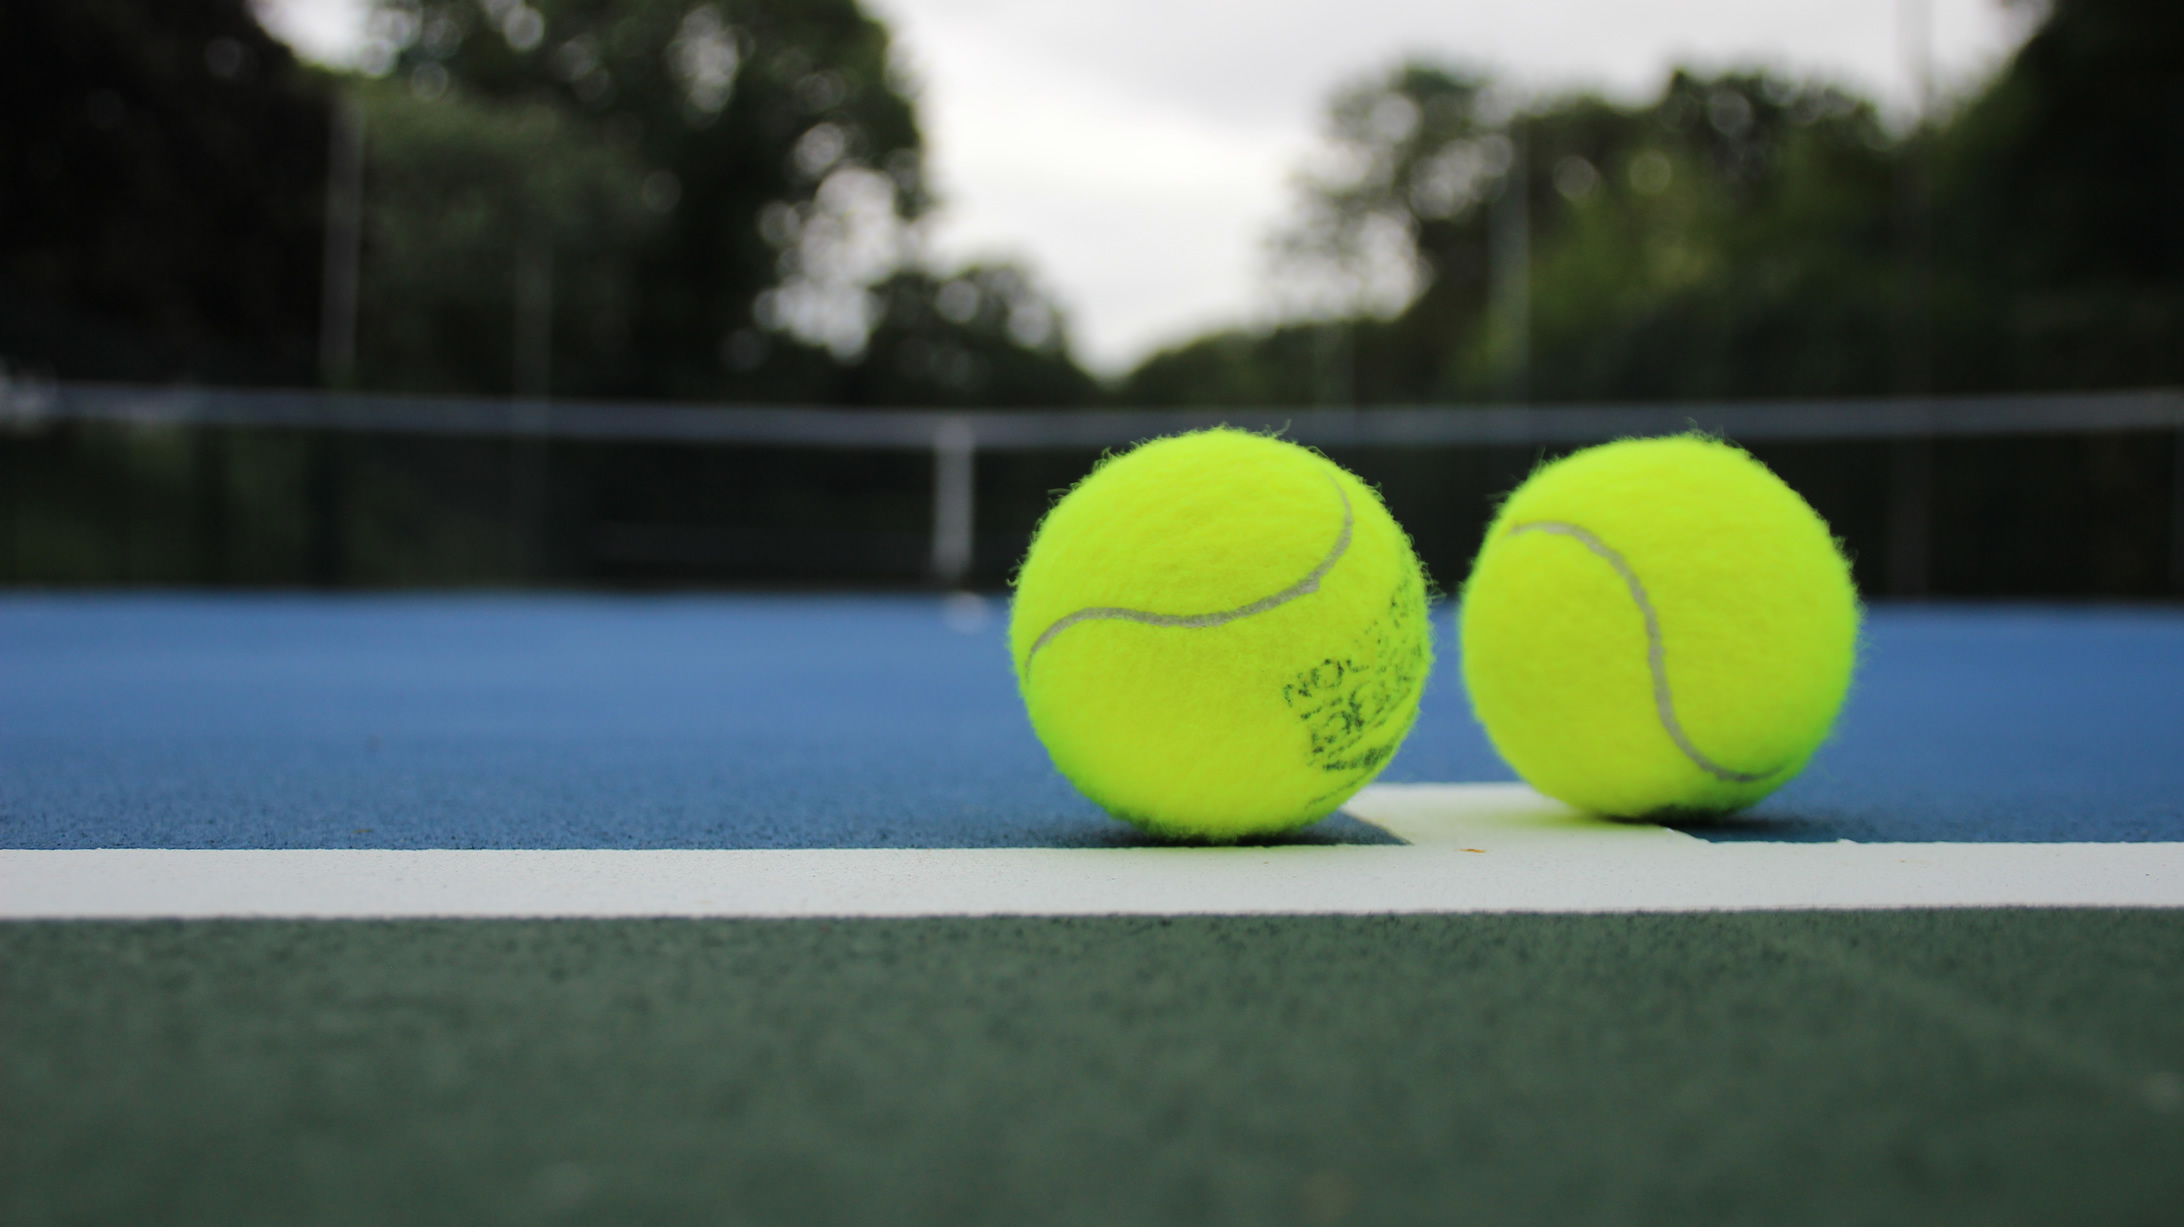 Men’s and Women’s singles tourney at Camber 26th July – 1st August‏